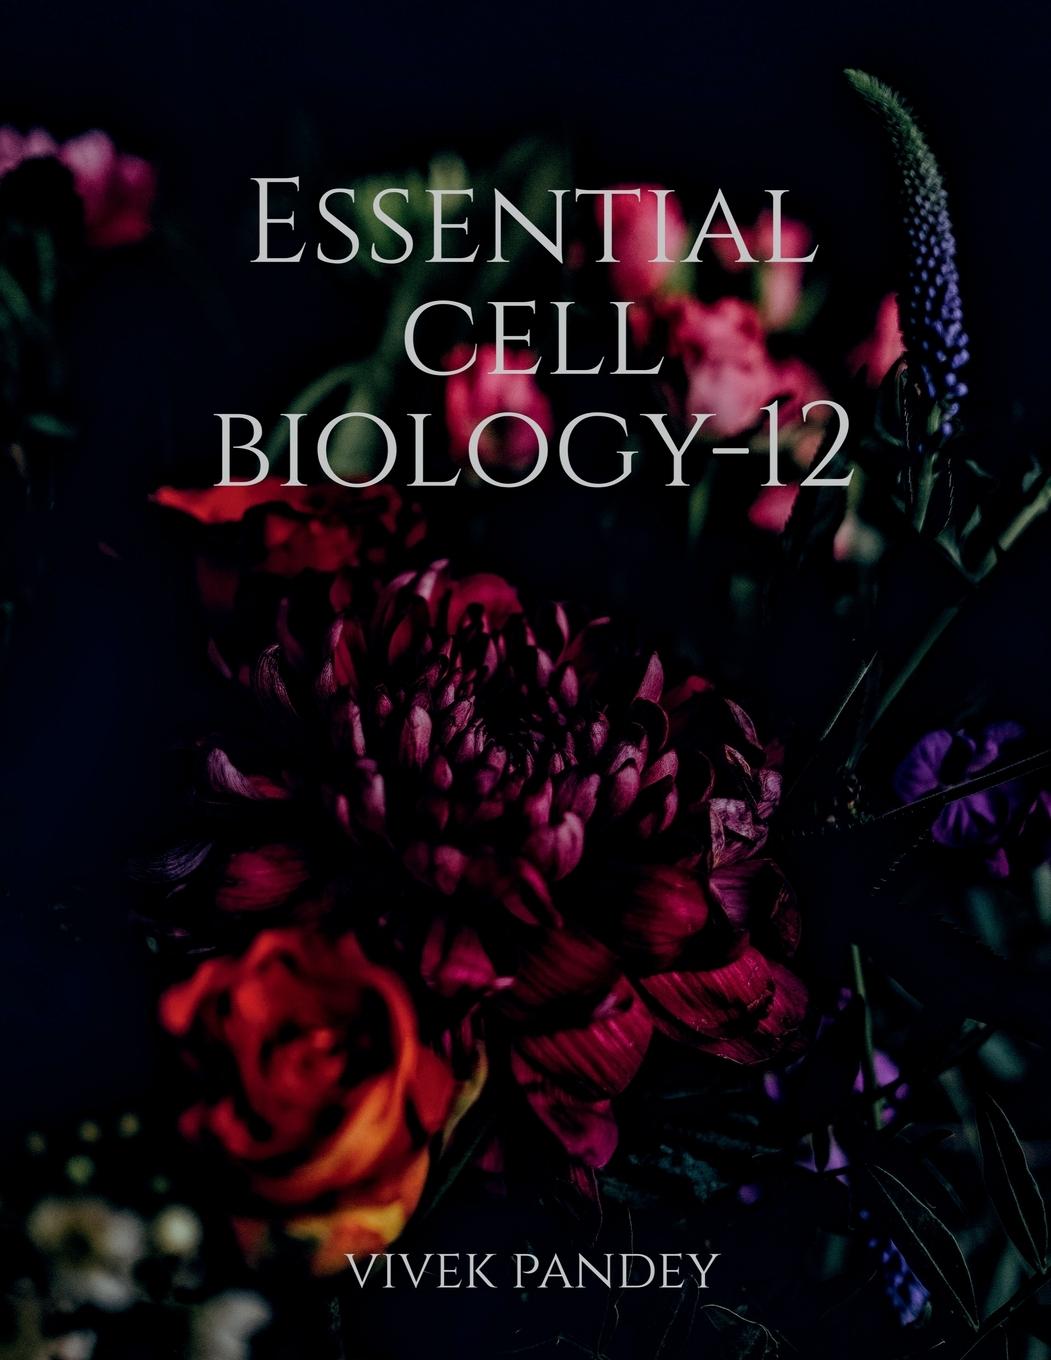 Kniha Essential cell biology-12 